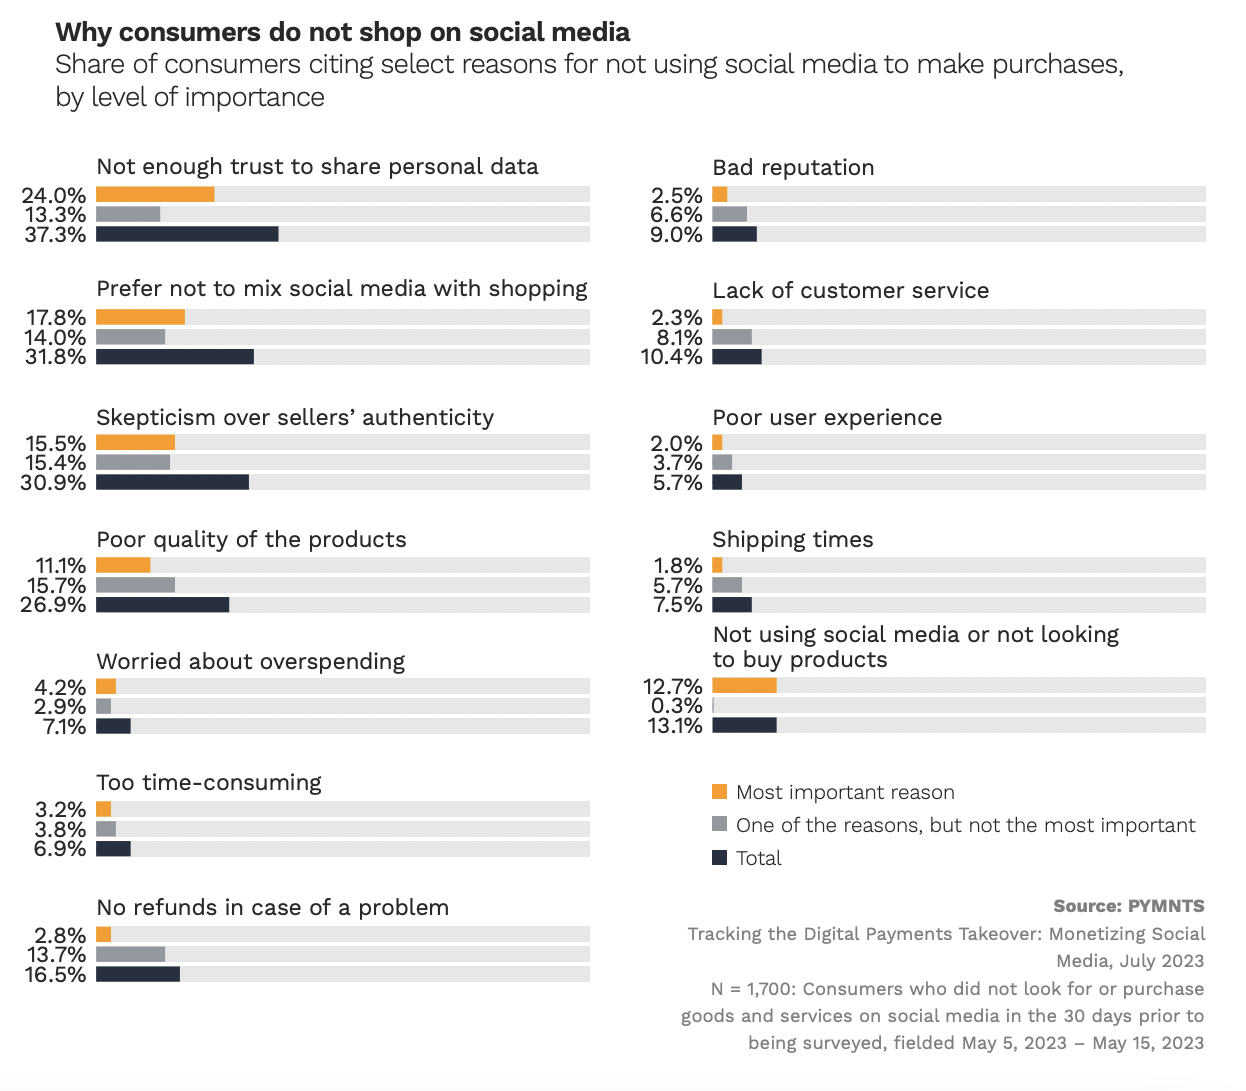 Why consumers do not shop on social media